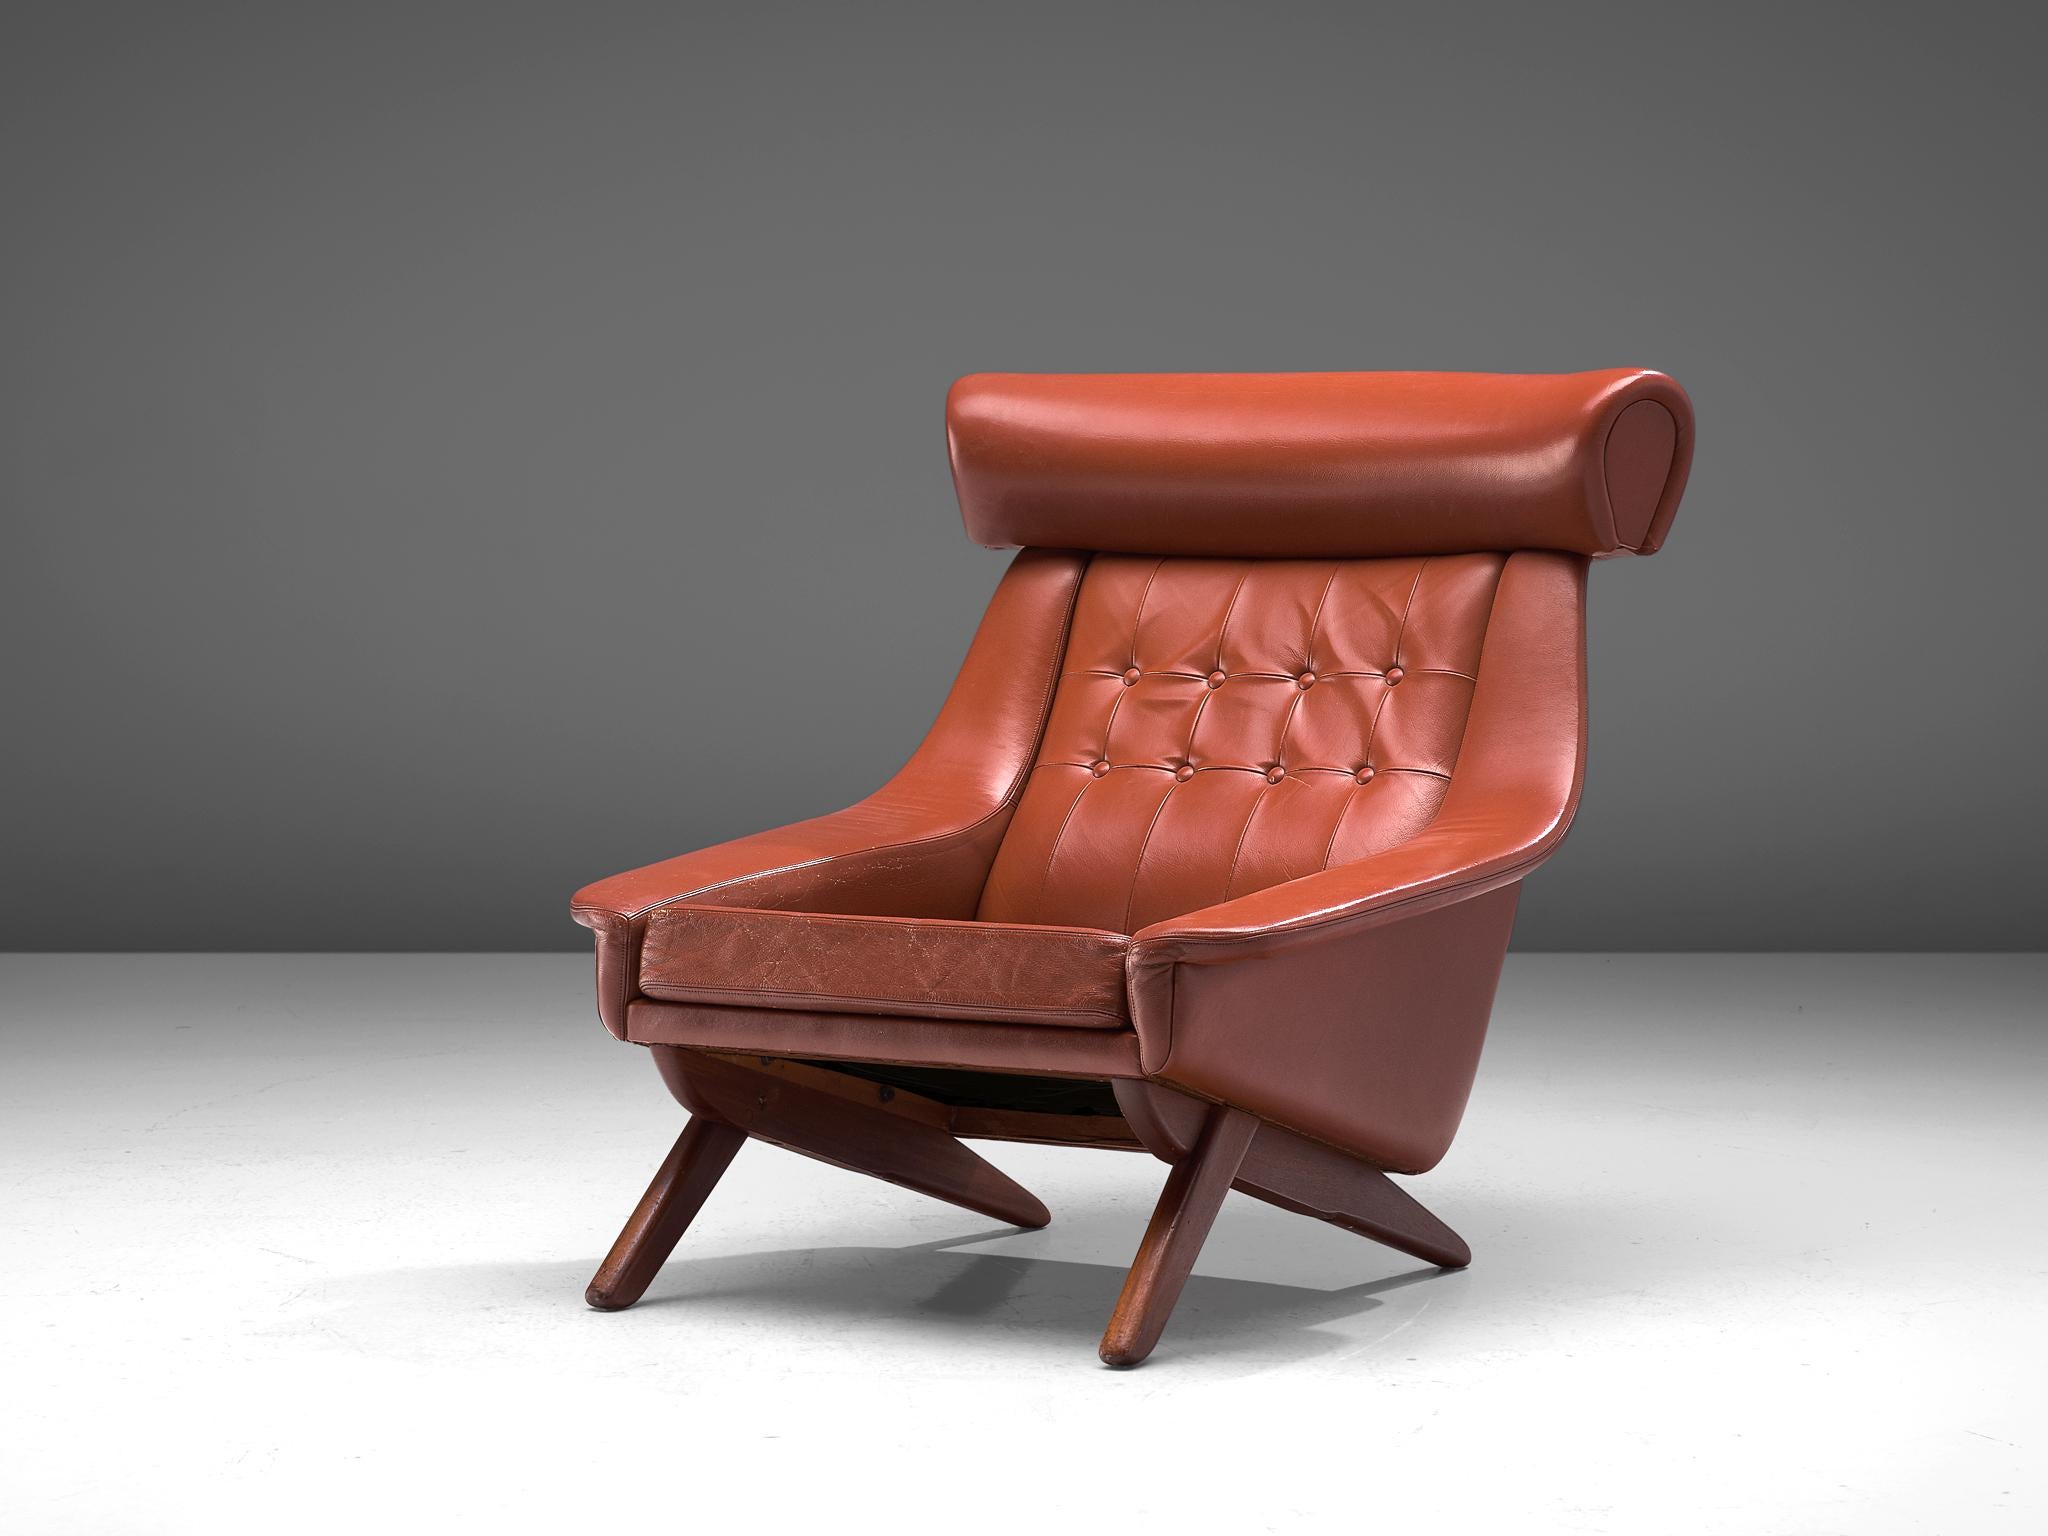 Lounge chair, in faux-leather, fabric and wood, Denmark 1960s.

Well designed easy chair in dark red leatherette upholstery. This 'Ox Chair' shows some interesting details. Like the wide and large headrest at the top of the back. The buttons on the